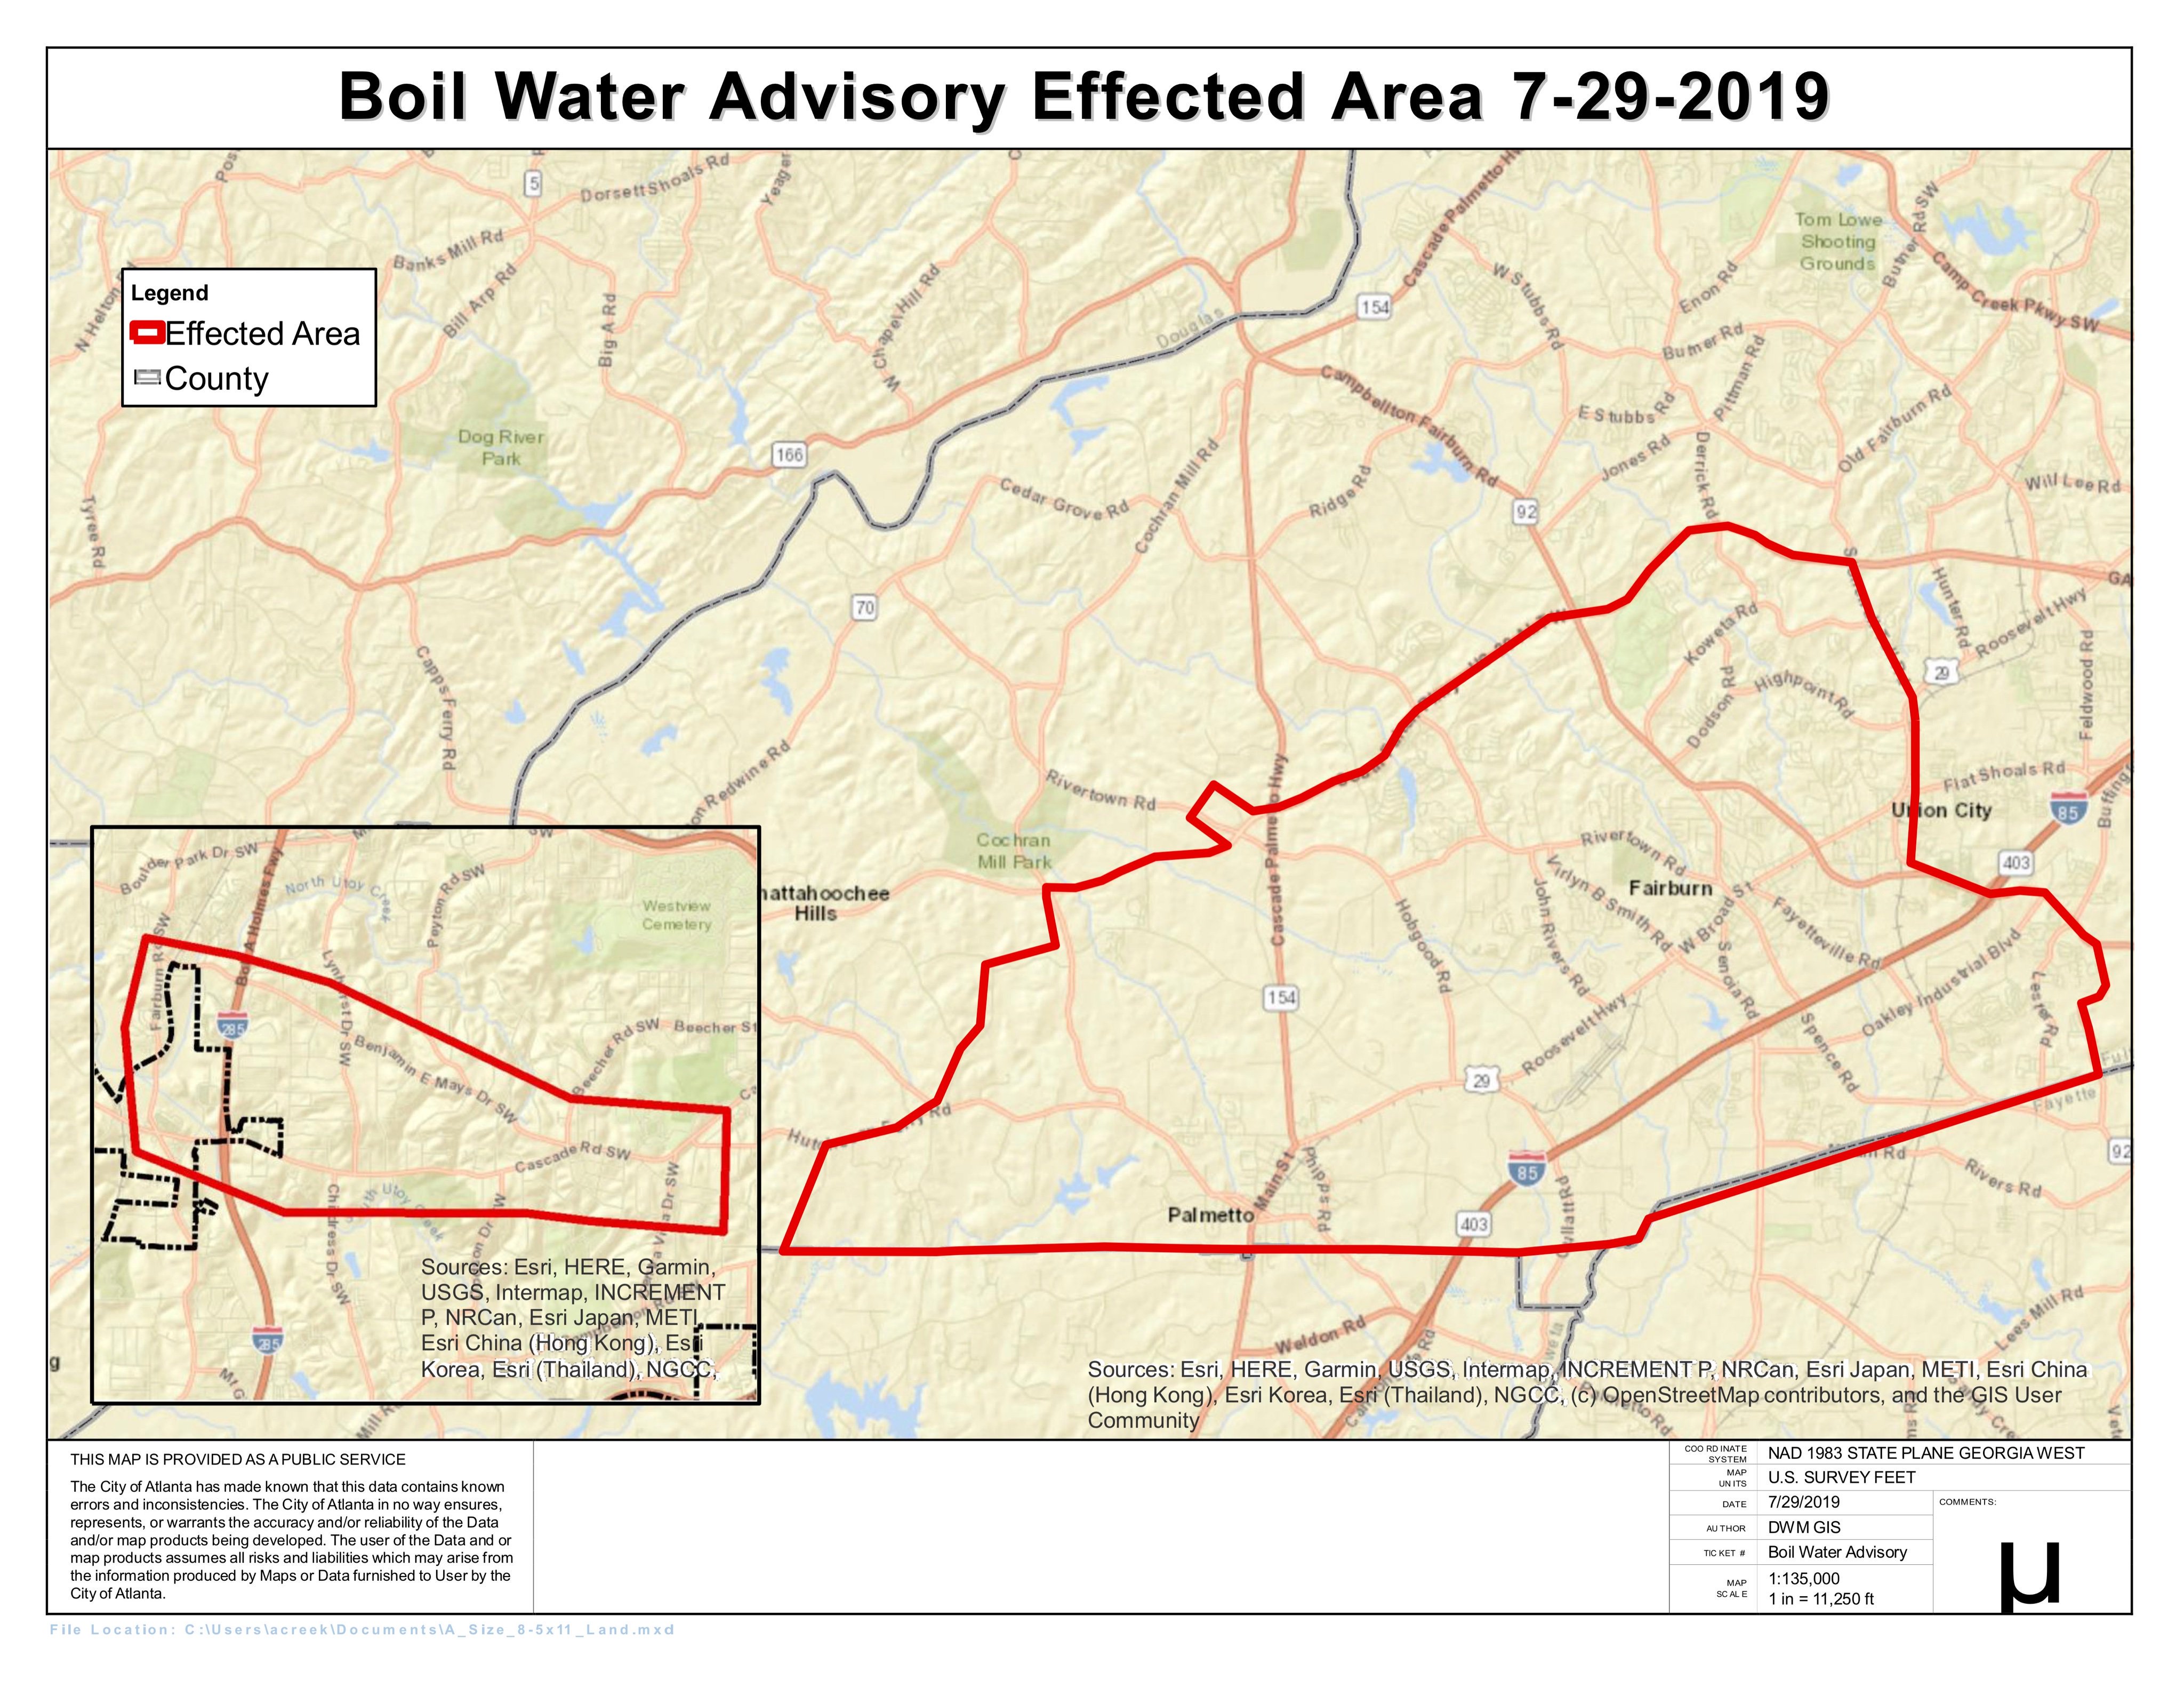 Boil Water Advisory Lifted for All Impacted Areas